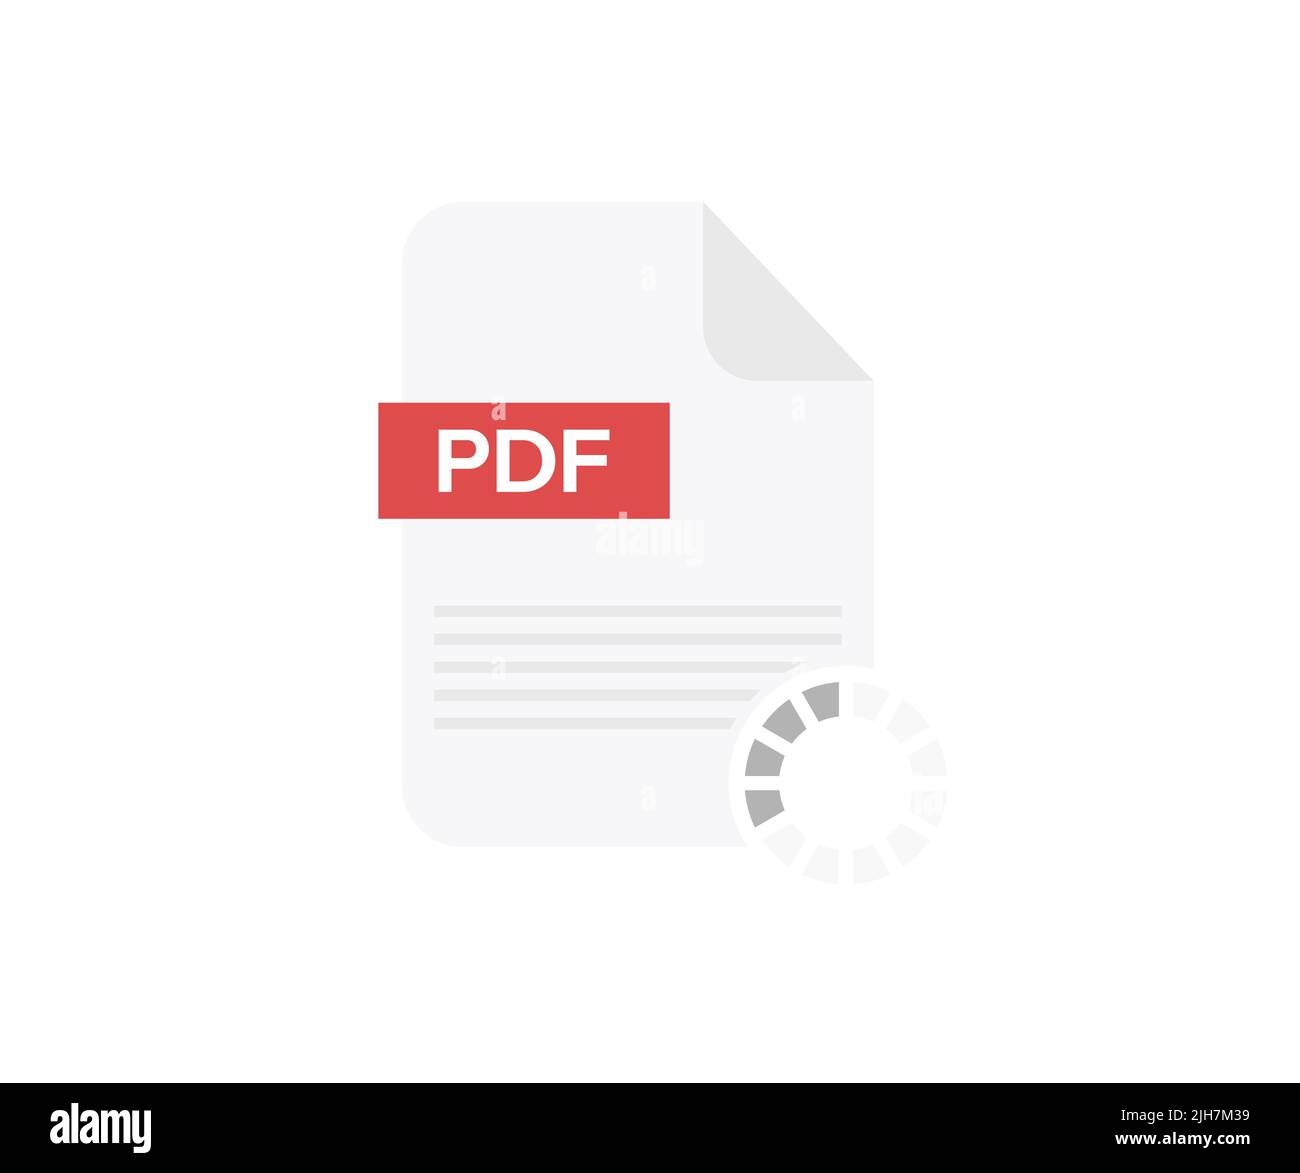 PDF file, Pdf document note icon logo design. Downloading concepts. Pdf notepad document business concept vector design and illustration. Stock Vector